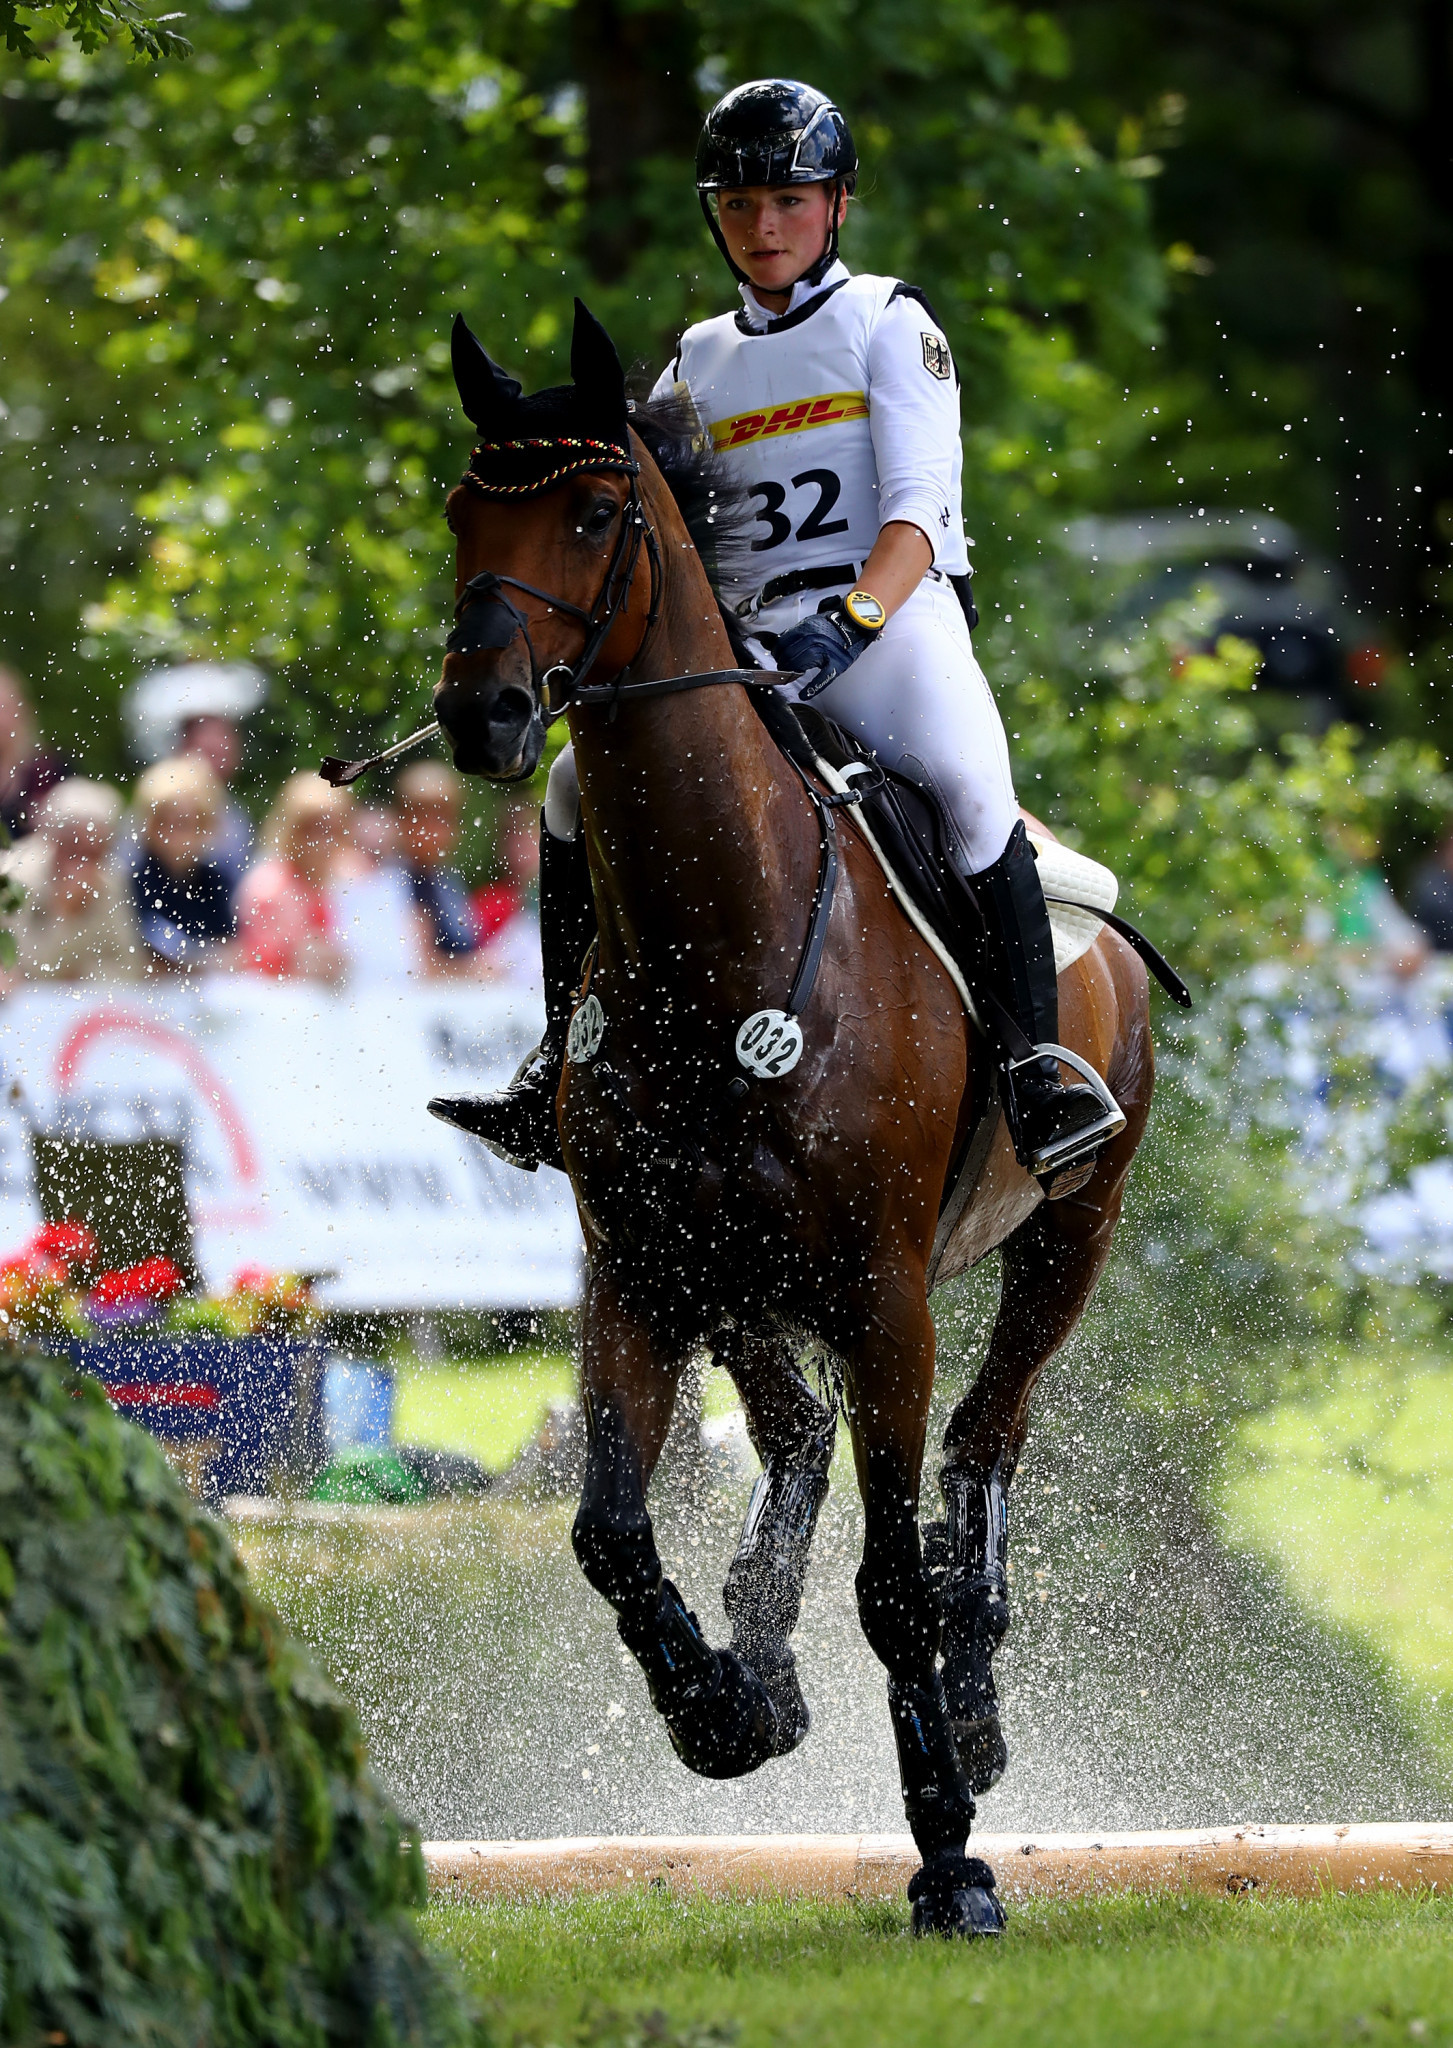 Julia Krajewski features on the German team that tops the standings after the second day of dressage at the FEI Nations Cup Eventing leg in Boekelo in The Netherlands ©Getty Images